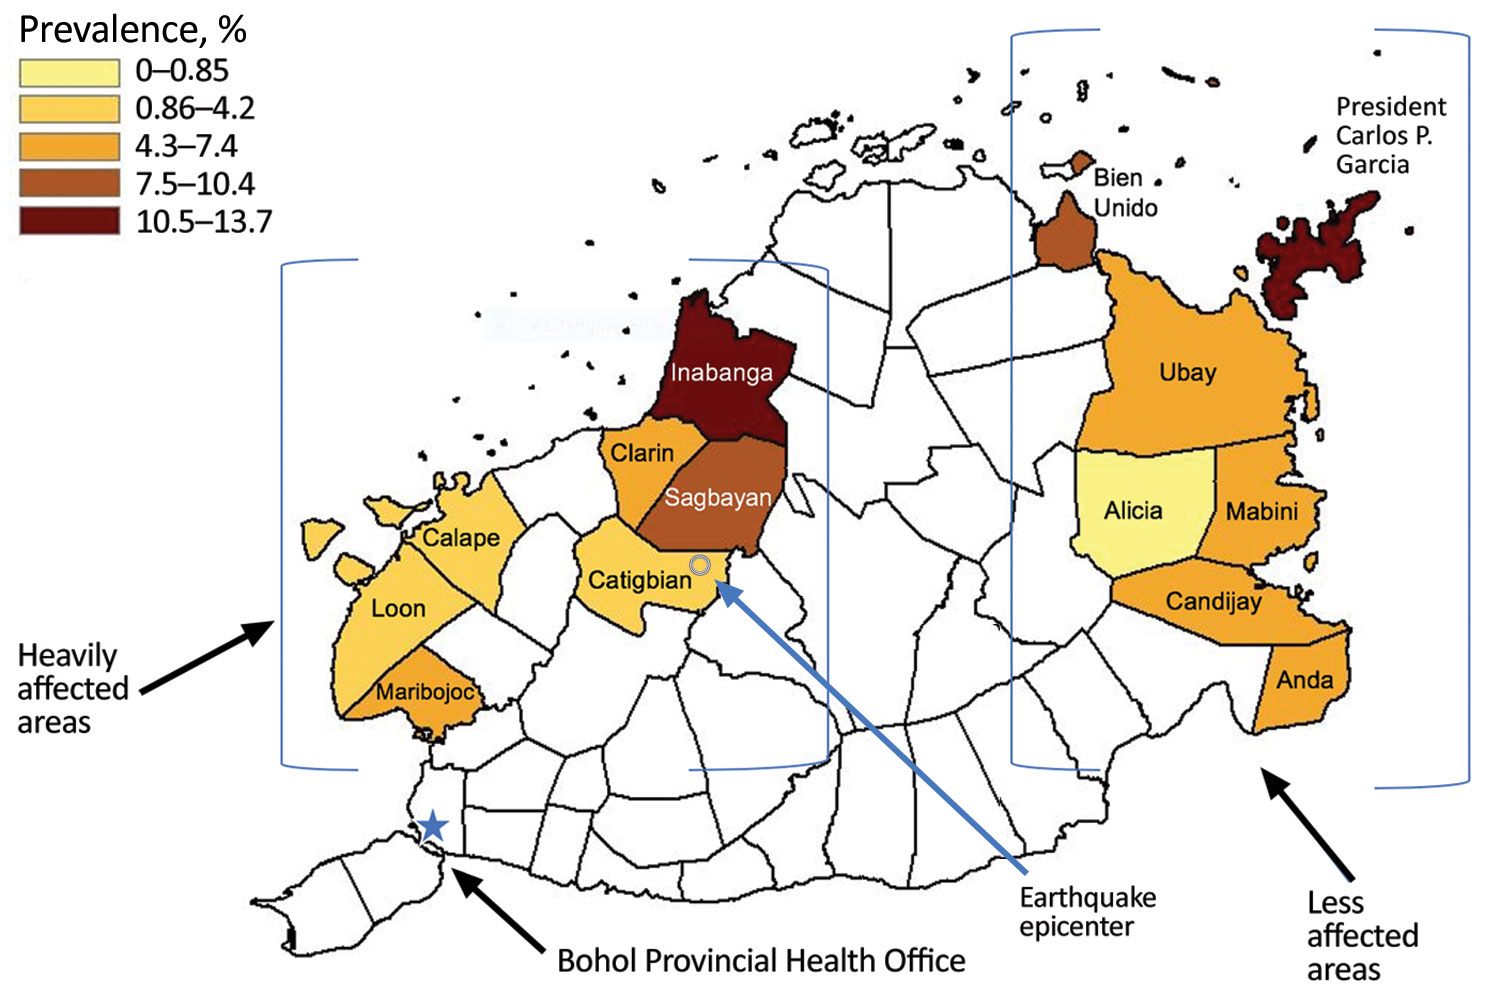 Prevalence of tuberculin skin test positivity by municipality obtained in study of tuberculosis in children in areas affected by 2013 natural disasters, Bohol, Philippines, 2016–2018. Epicenter of 2013 earthquake is indicated.